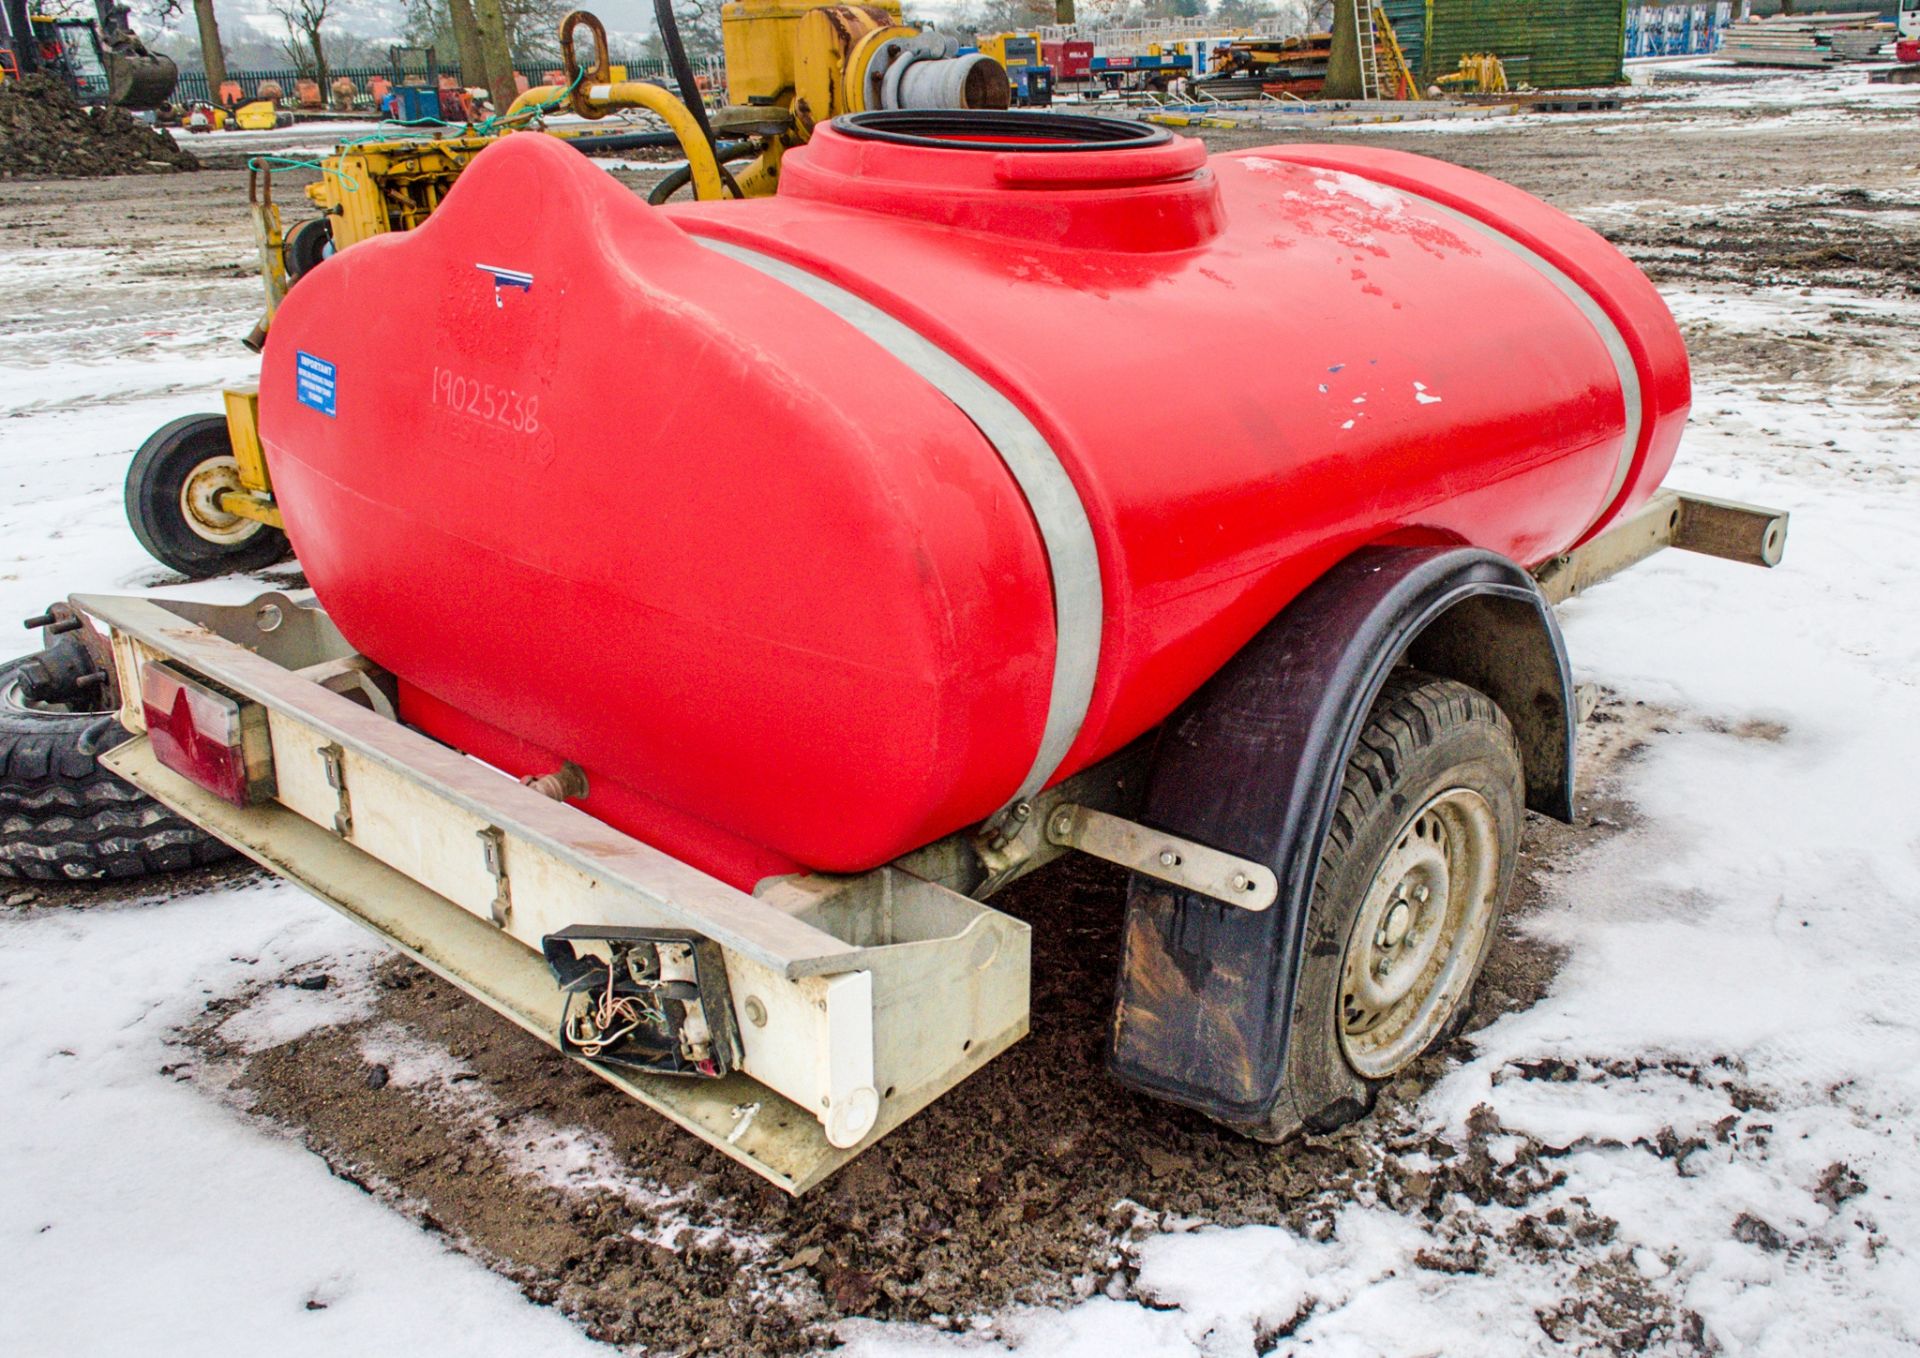 Western 250 gallon fast tow water bowser - Image 2 of 2